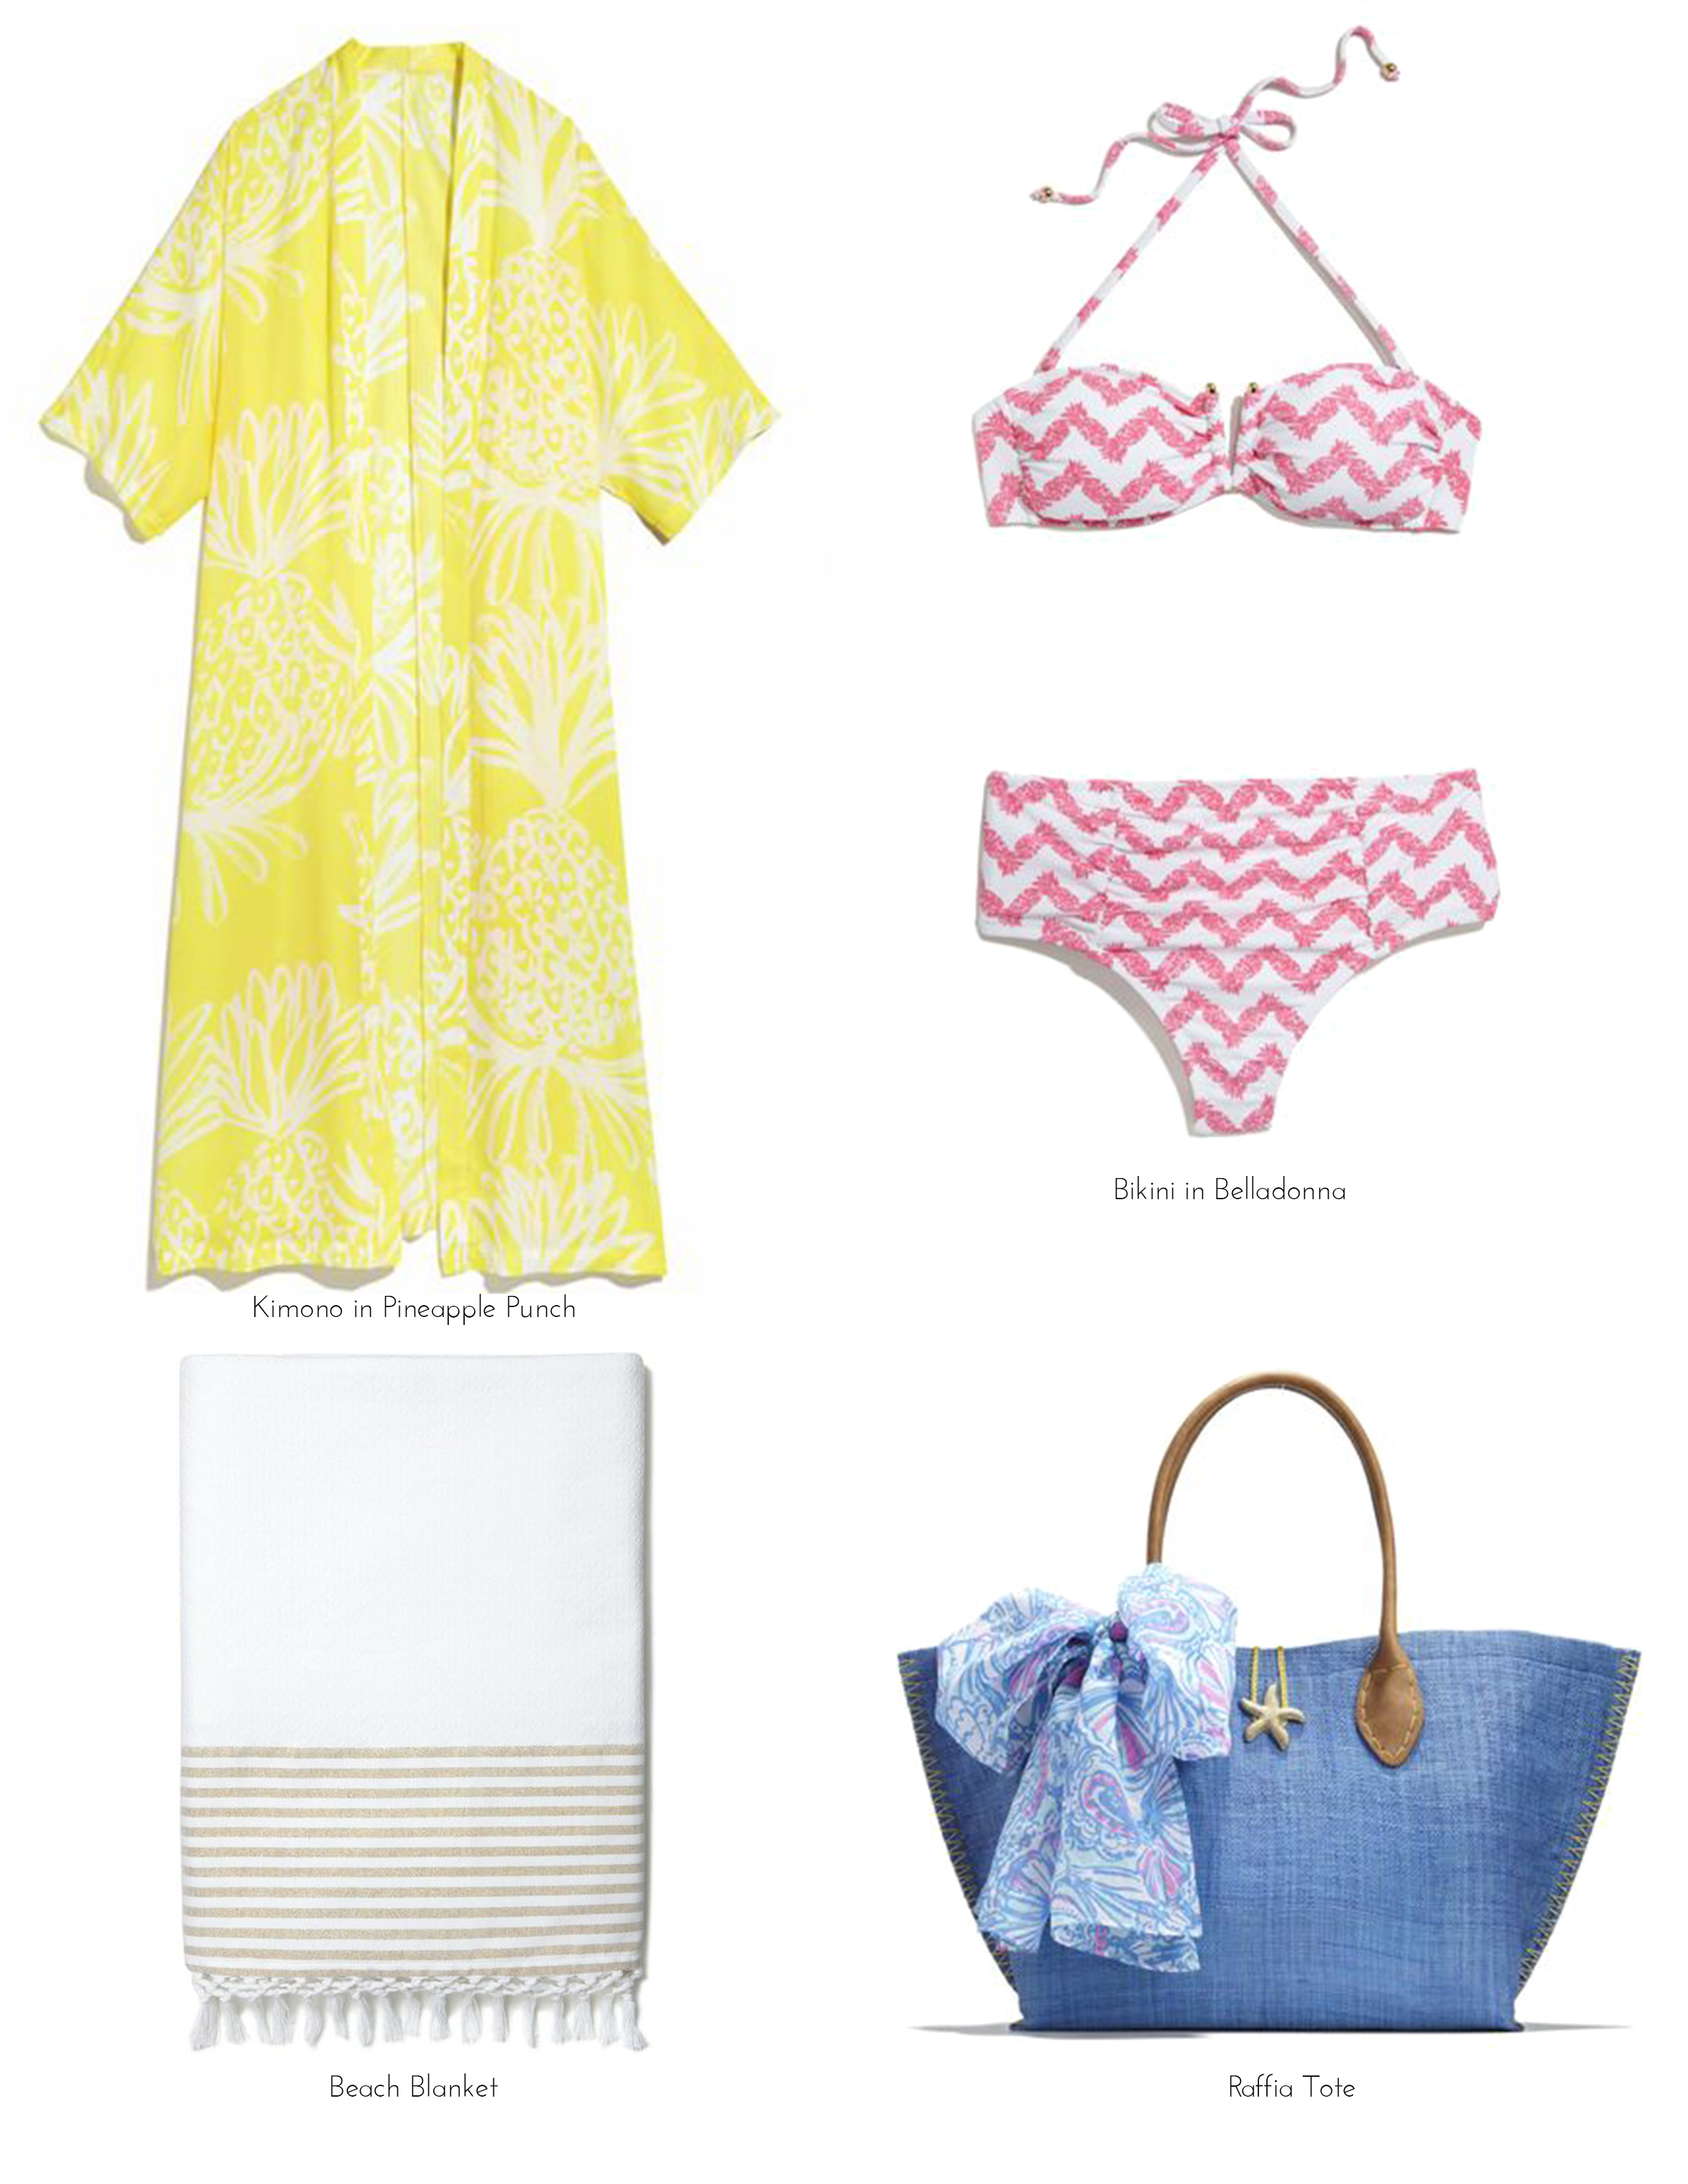 Lilly Pulitzer Collection Target Image Photo